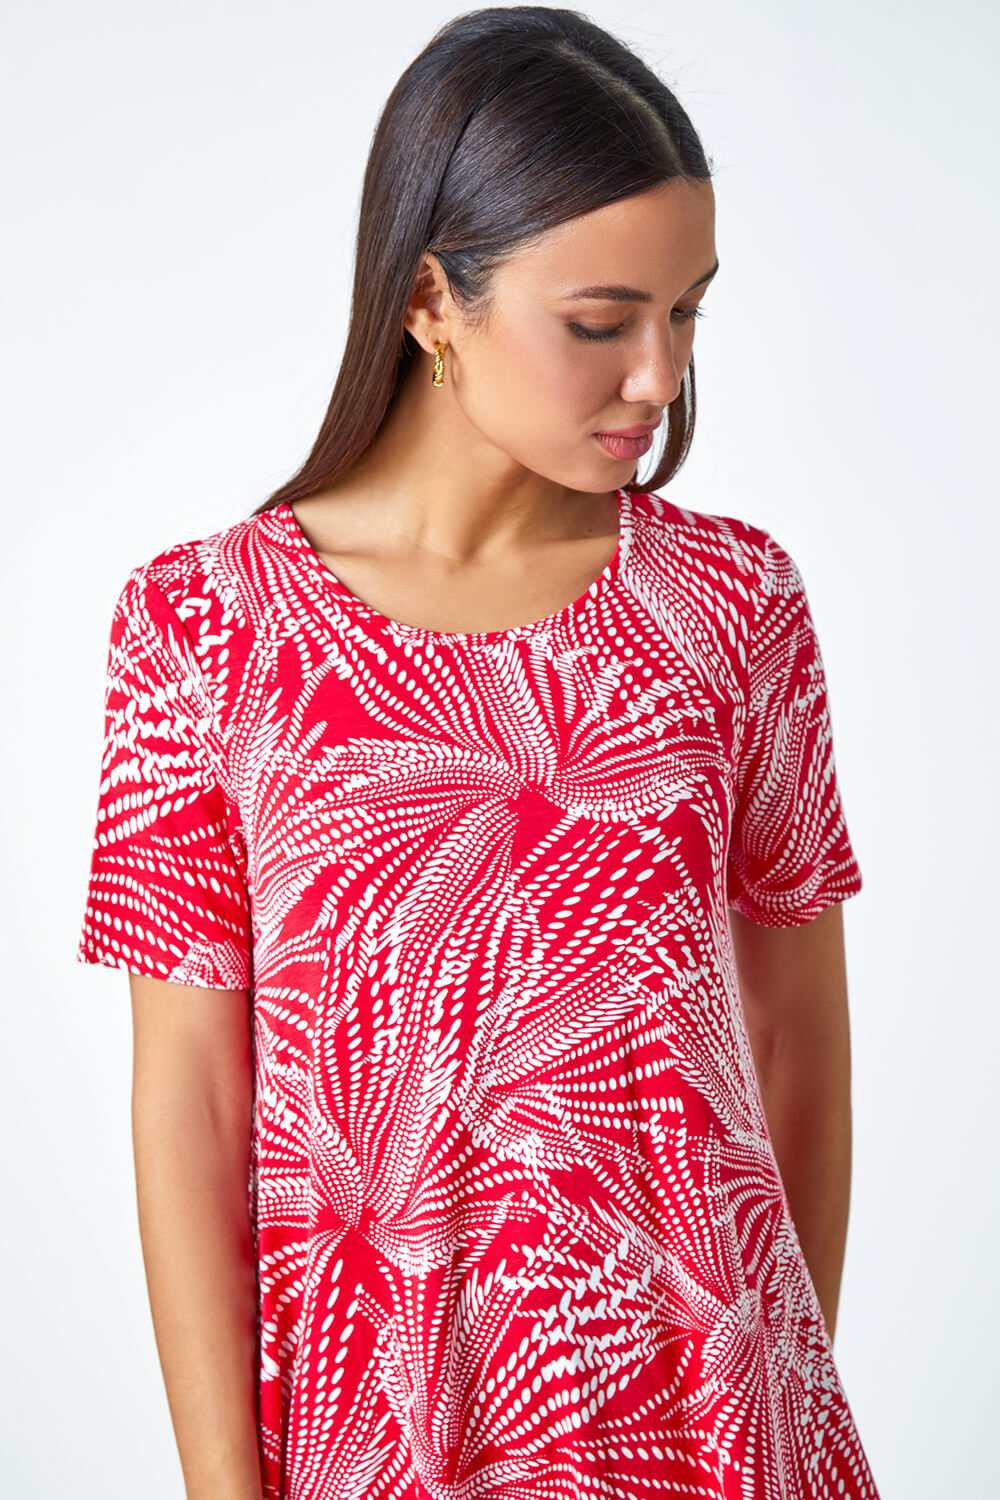 Red Textured Fan Print Stretch Hanky Hem Top, Image 4 of 5